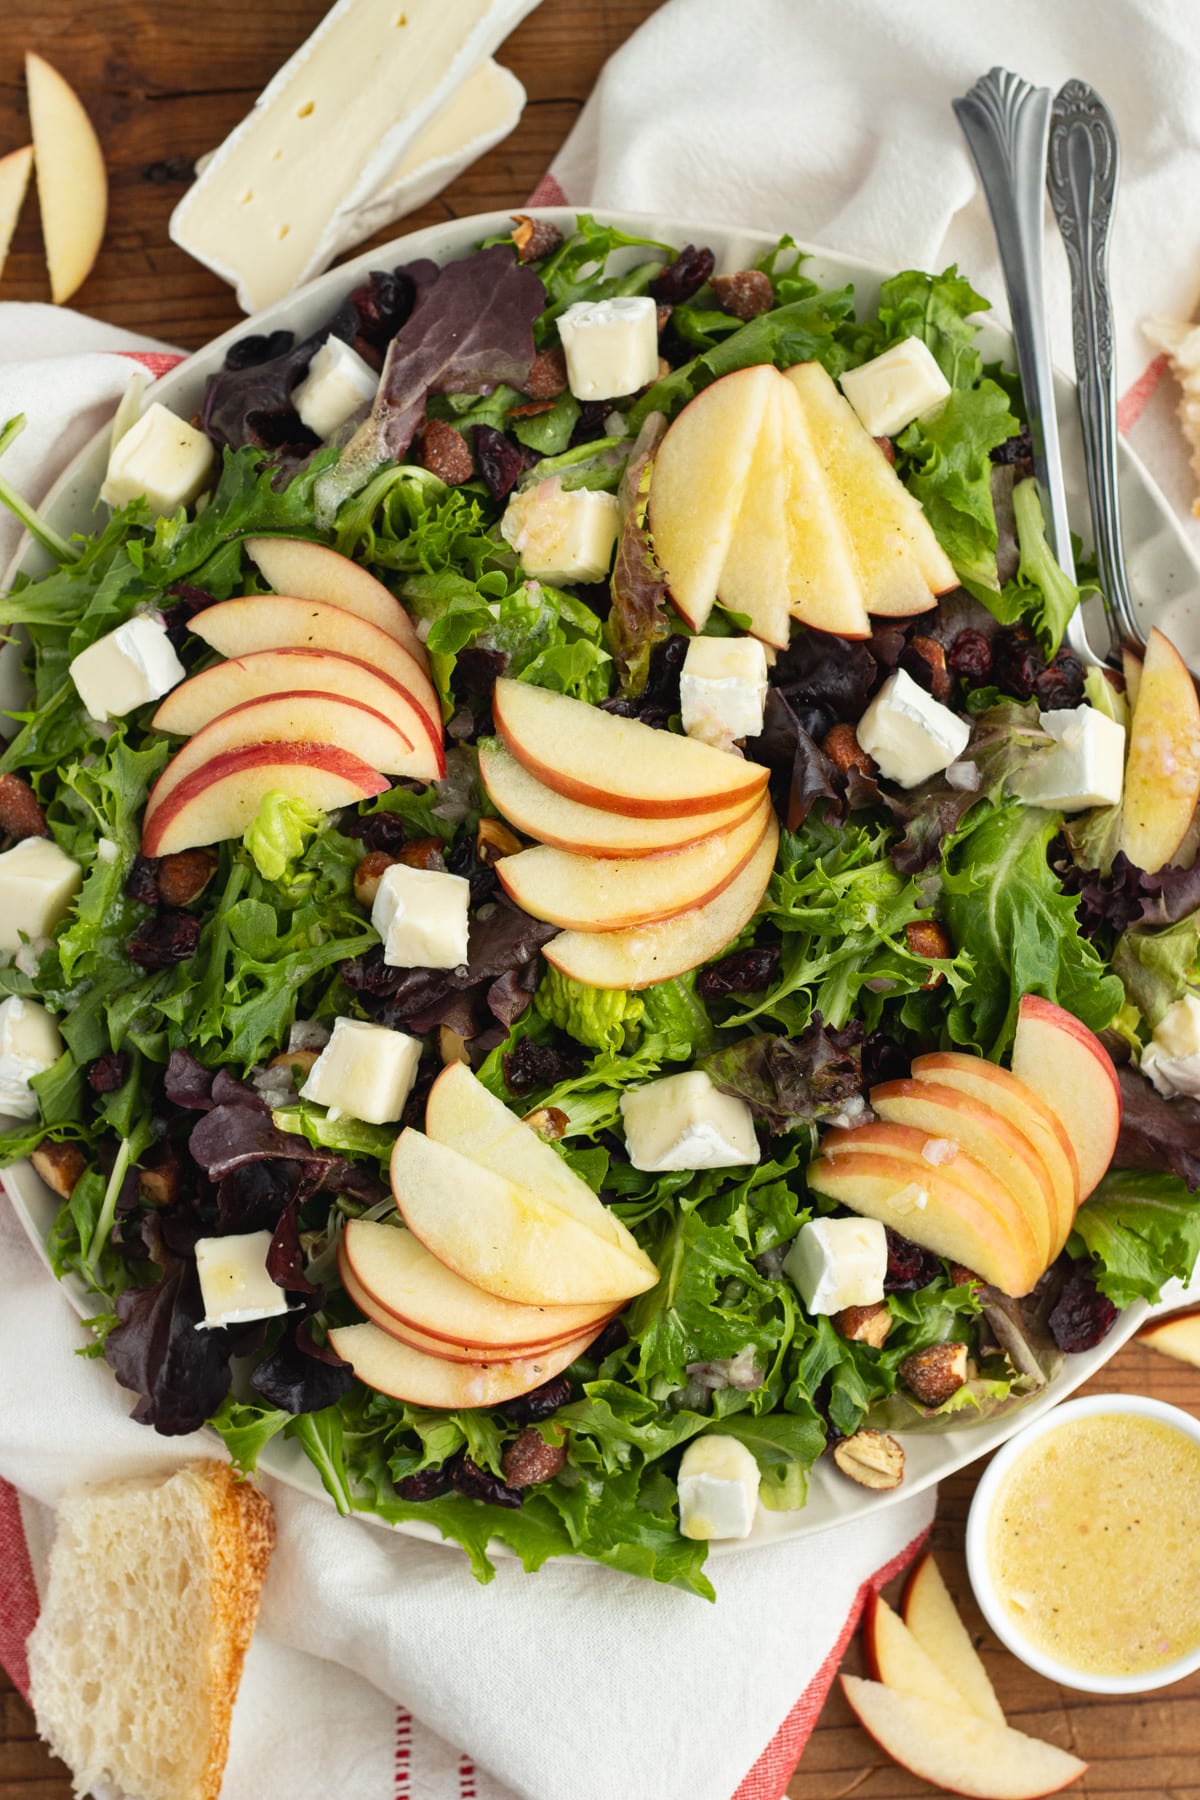 This is a picture of a plate filled with the salad with brie, apple, cranberries and almonds.